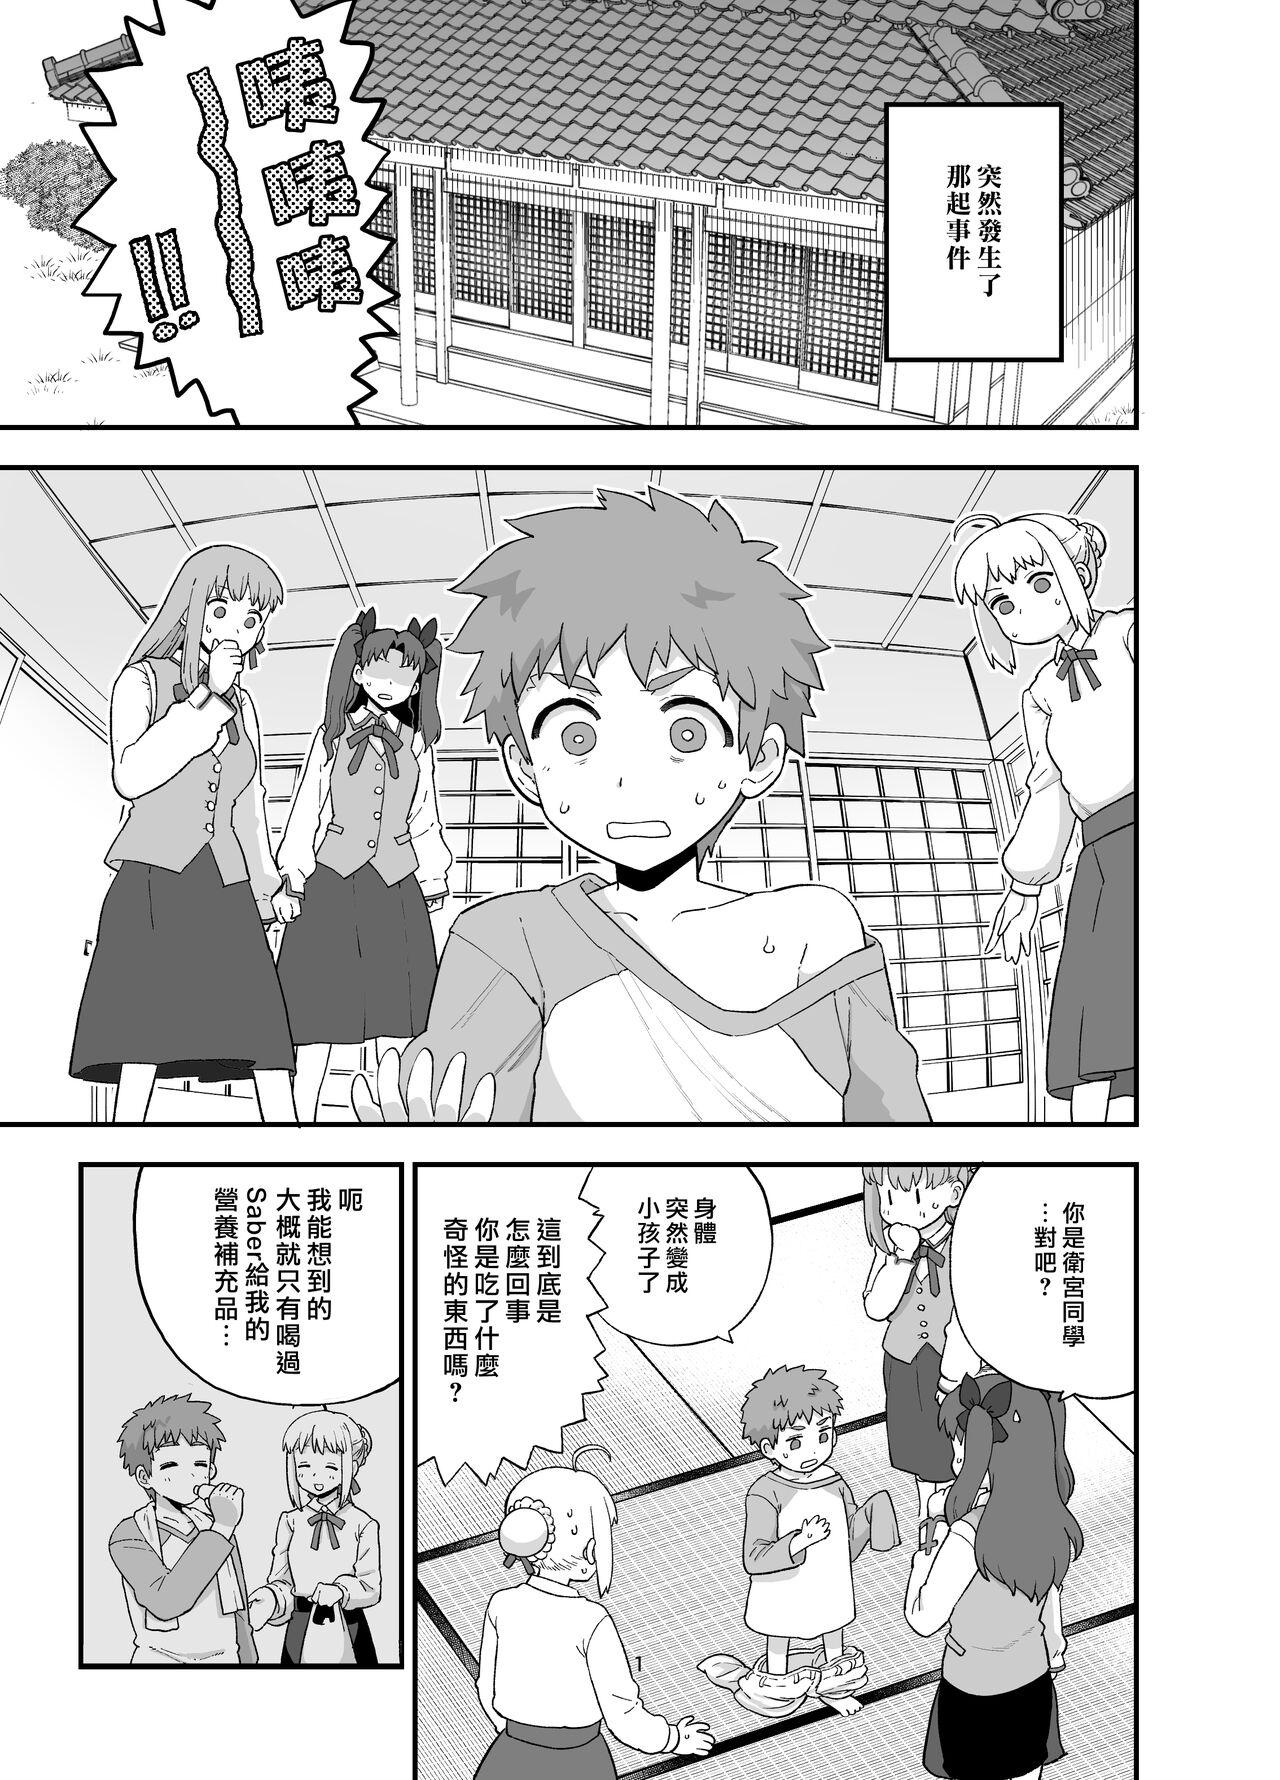 Puto Rider-san to Orusuban - Fate stay night Francaise - Page 4